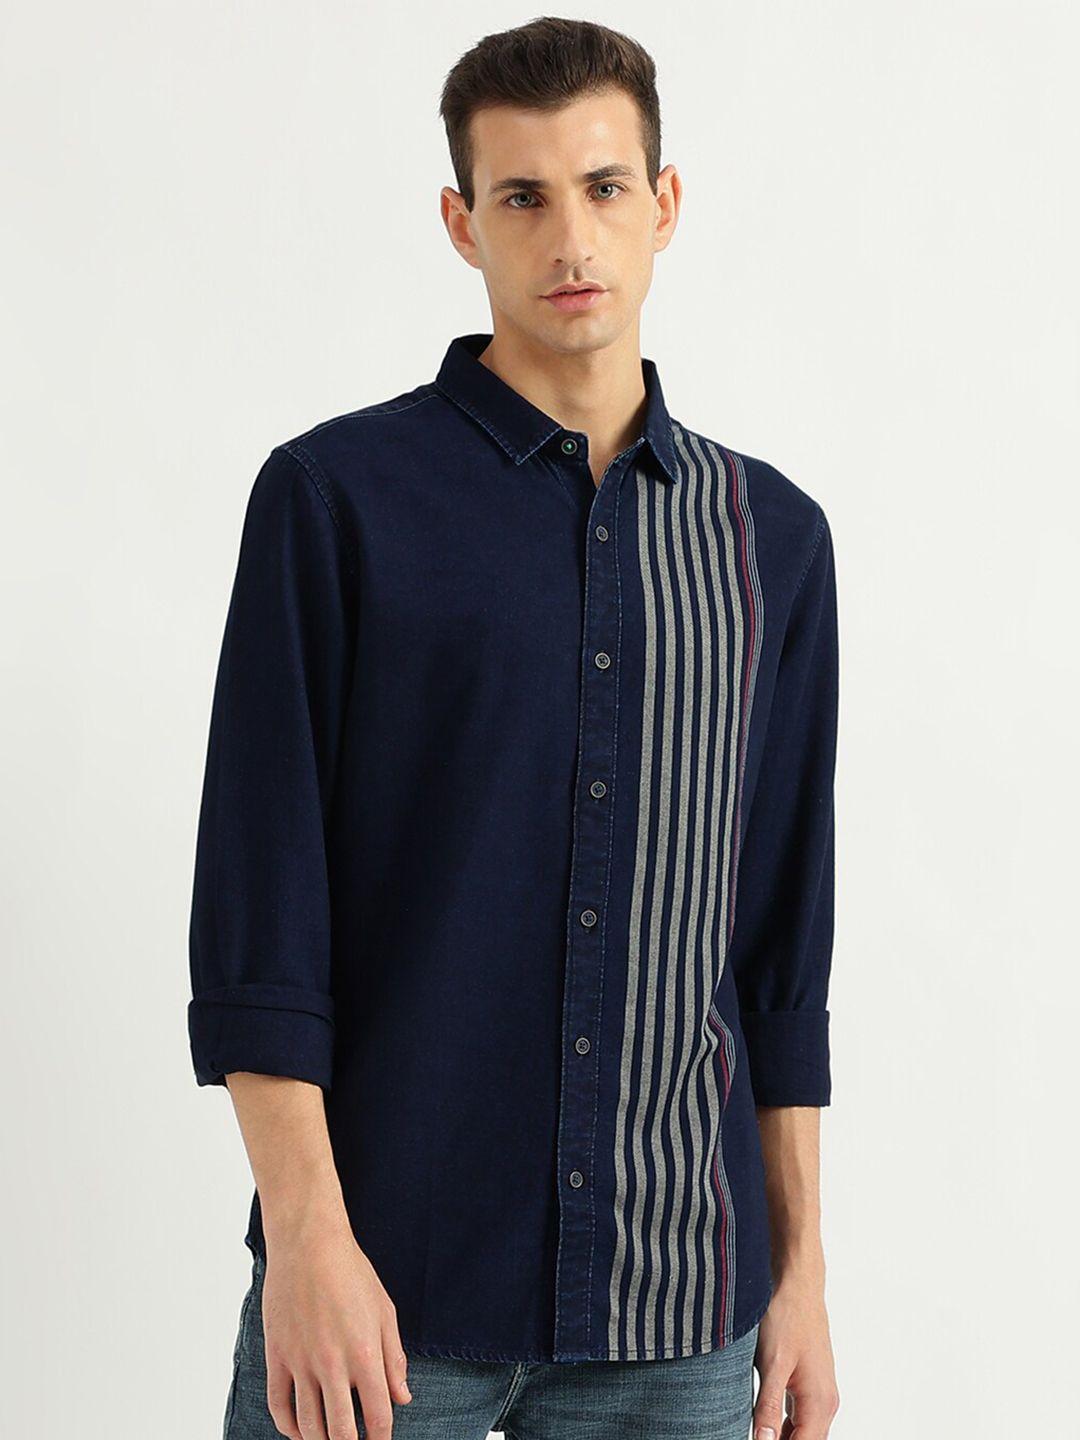 united colors of benetton slim fit vertical striped cotton casual shirt